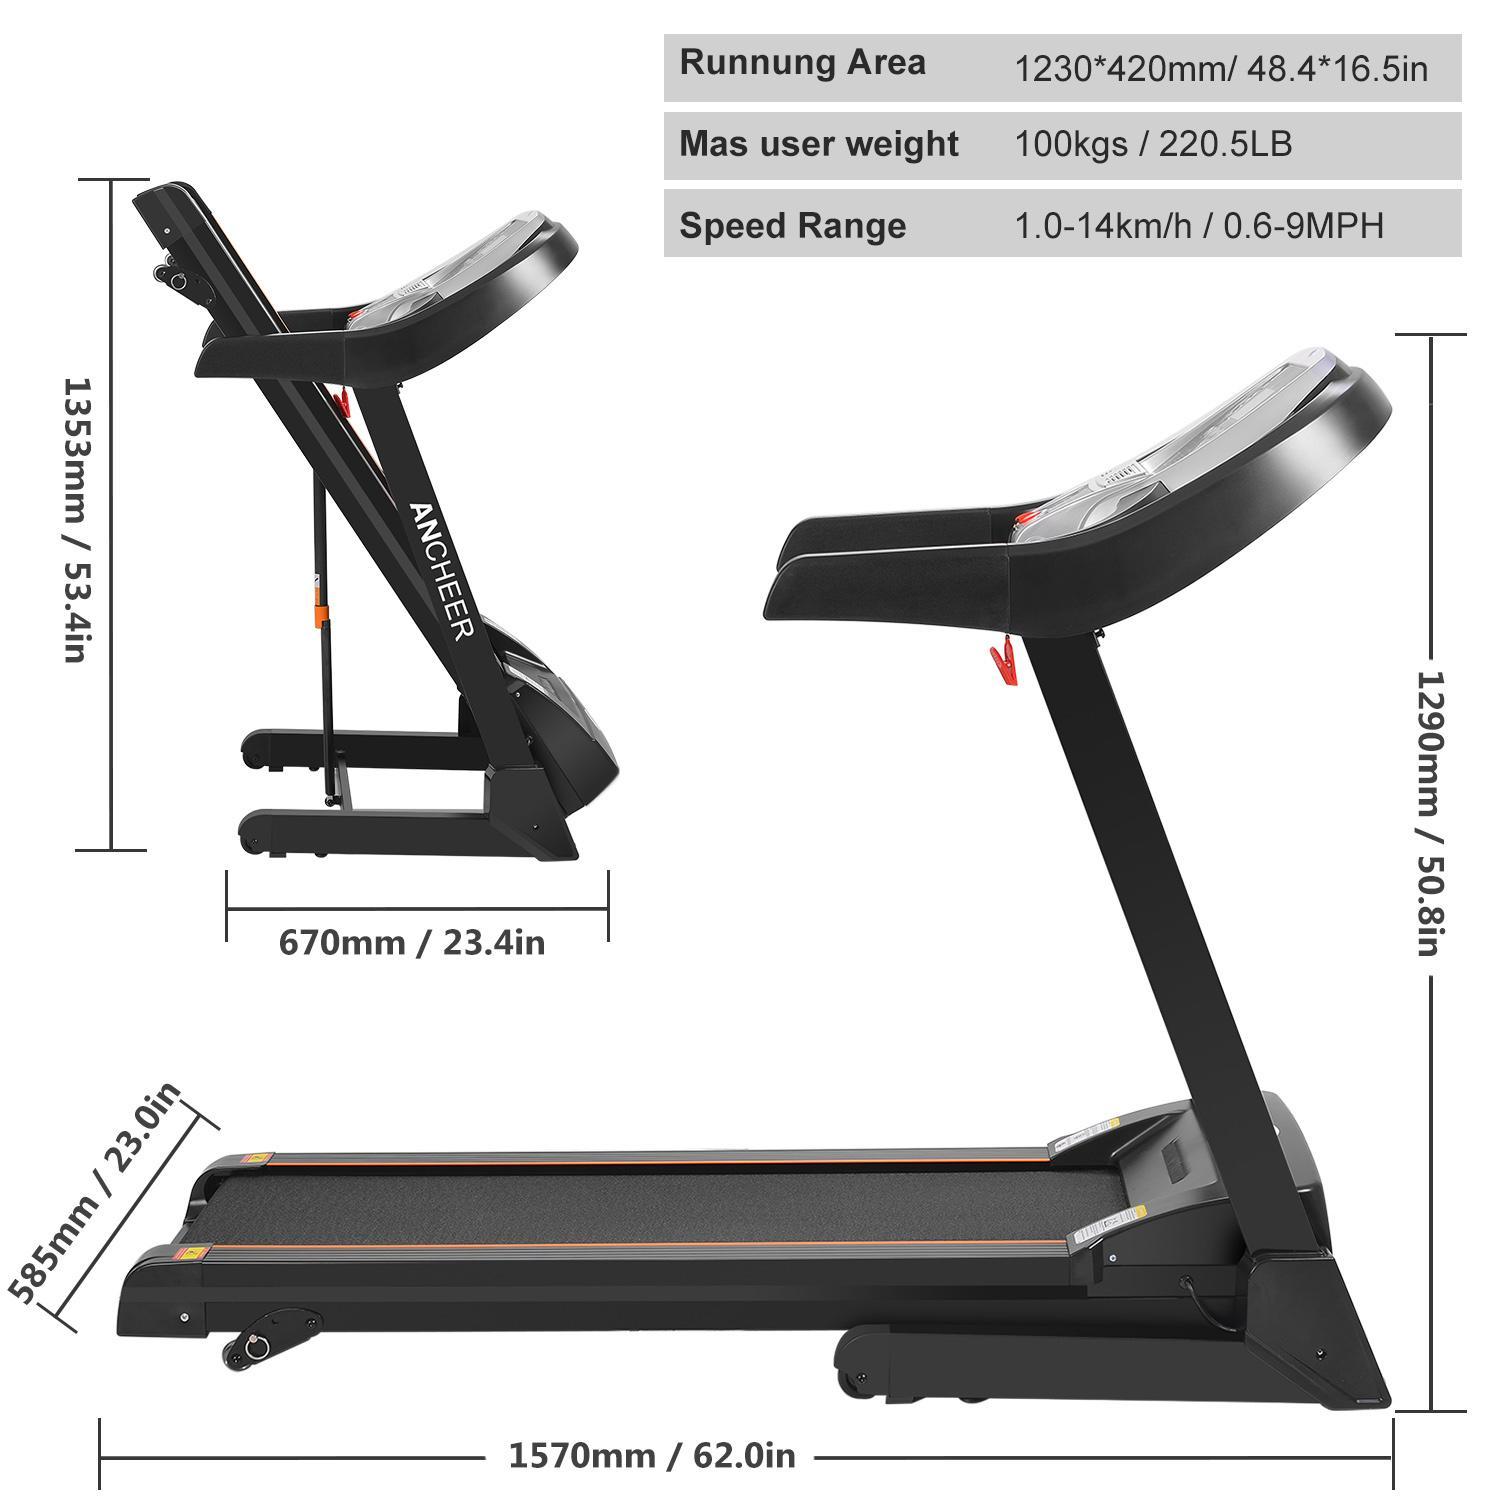 BESTVALUE (Promotion Limited&RANDOM GIFT) 2019 New Professional 2.25HP High Quality Indoor Commercial Health Fitness Training Treadmill